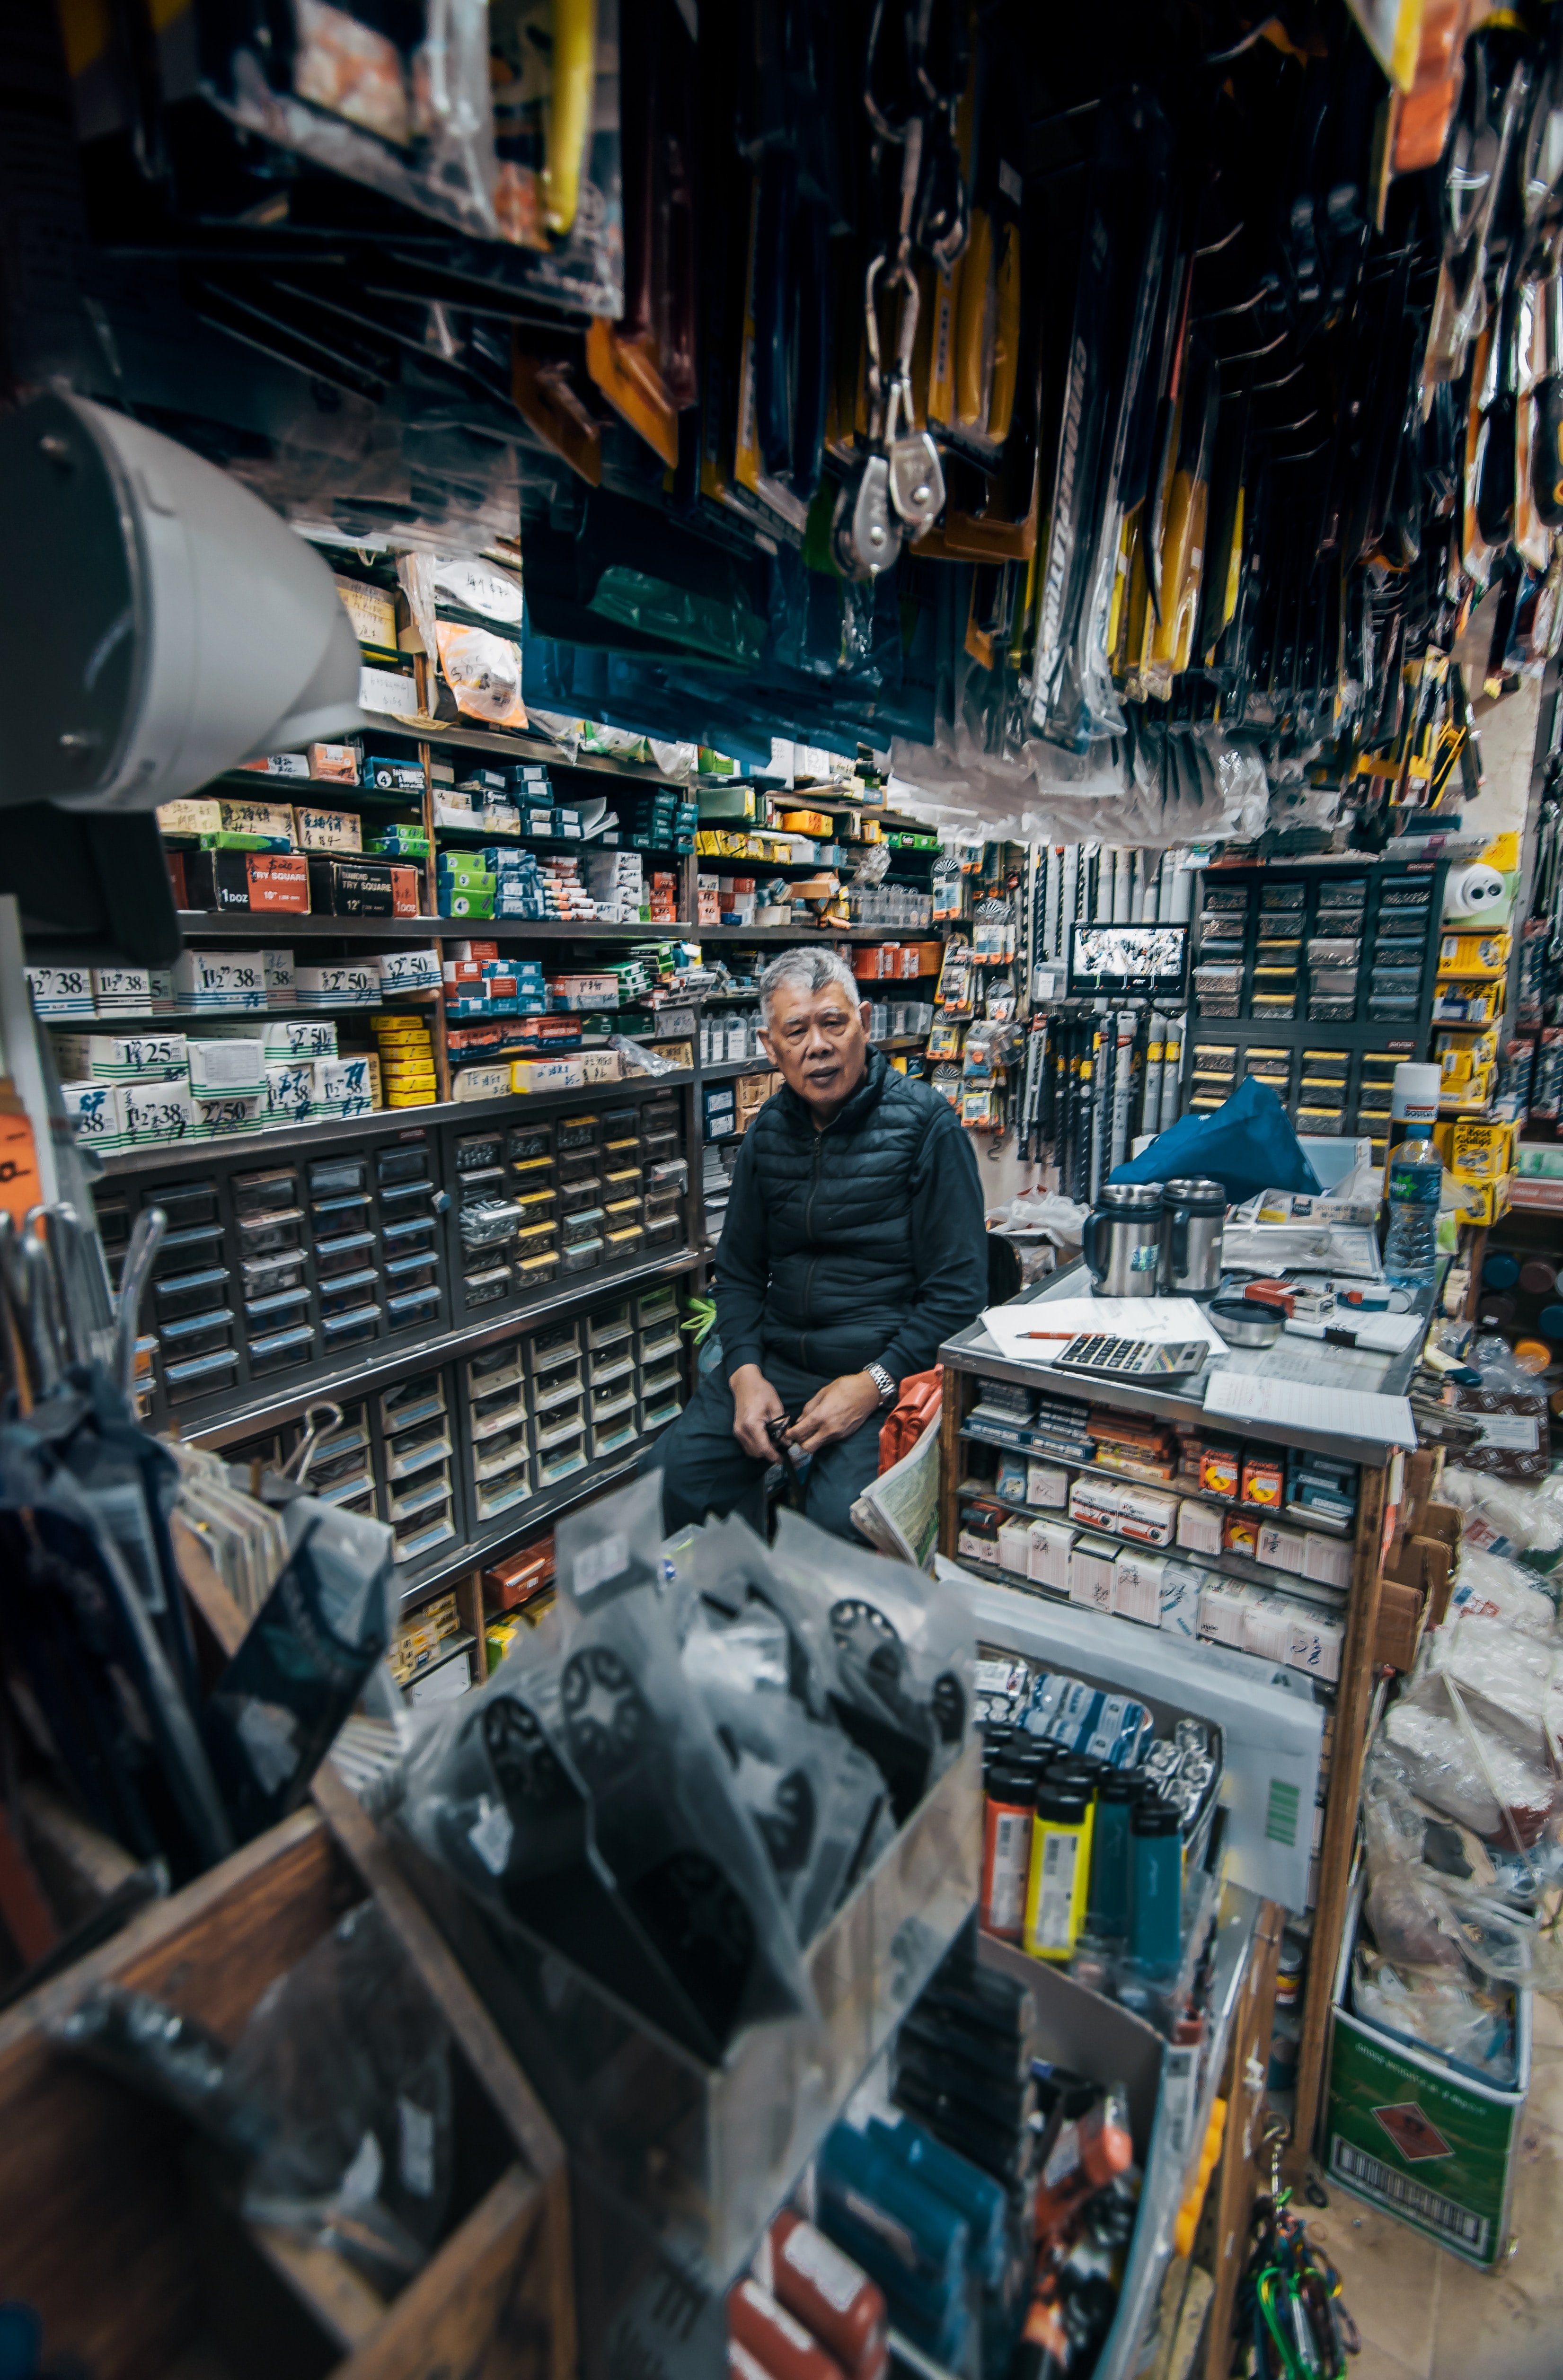 Inside a hardware store | Photo by Earvin Huang on Unsplash